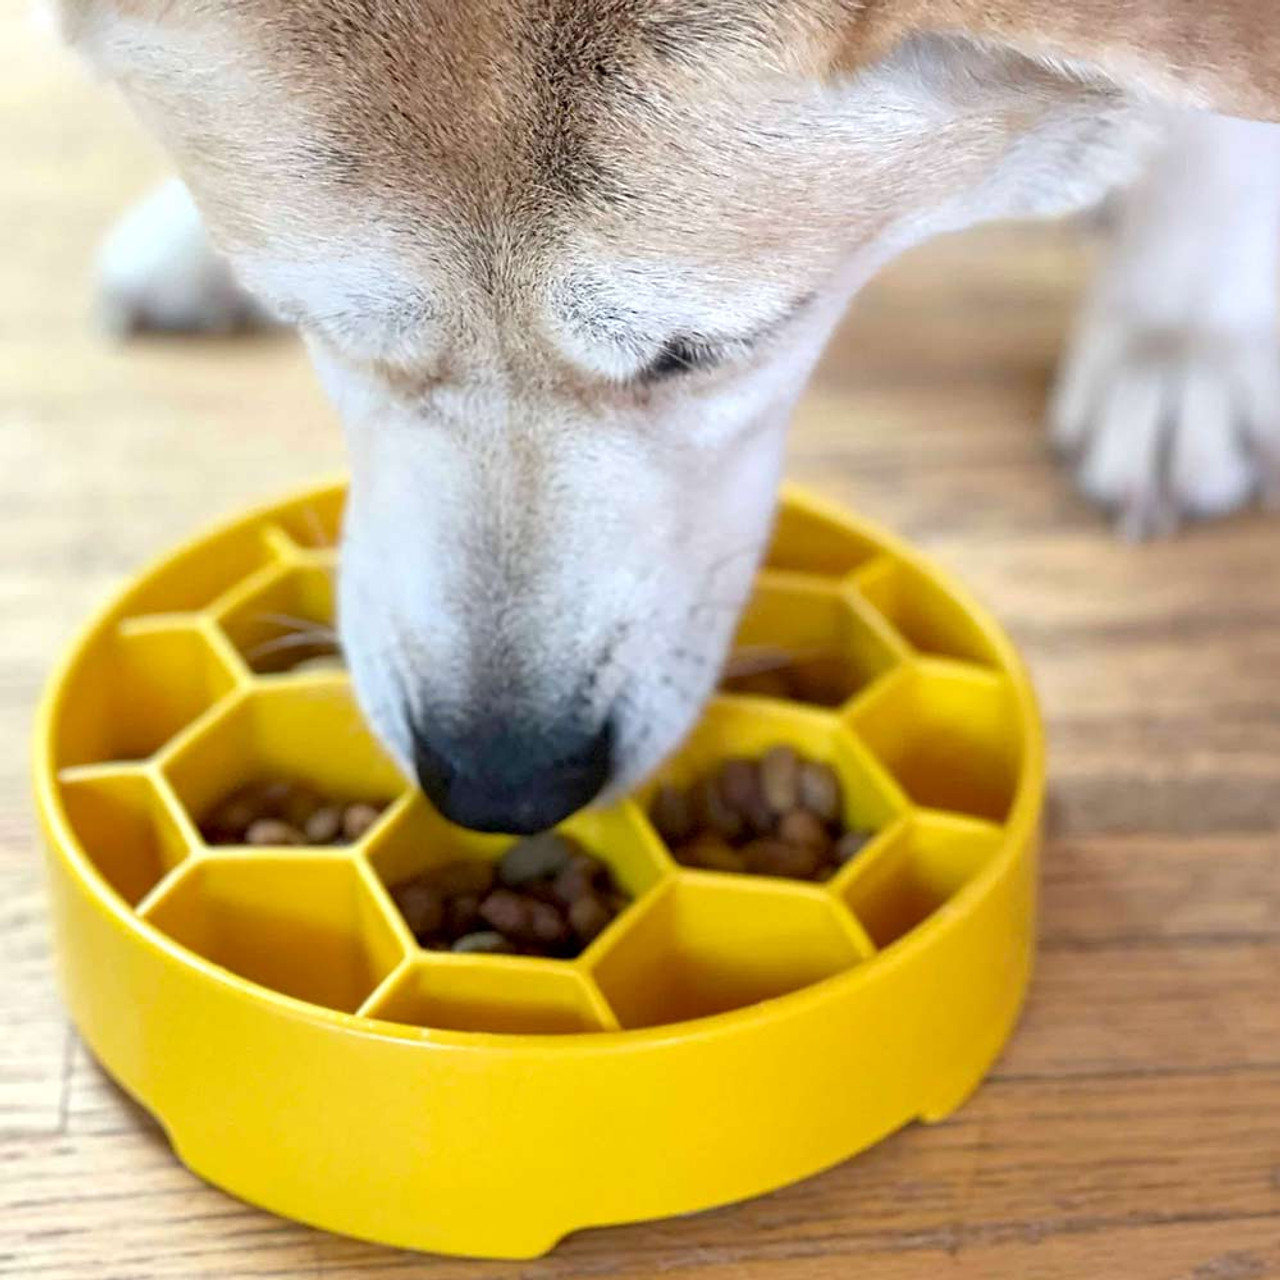 Great Outdoors Design eBowl Enrichment Slow Feeder Bowl for Dogs